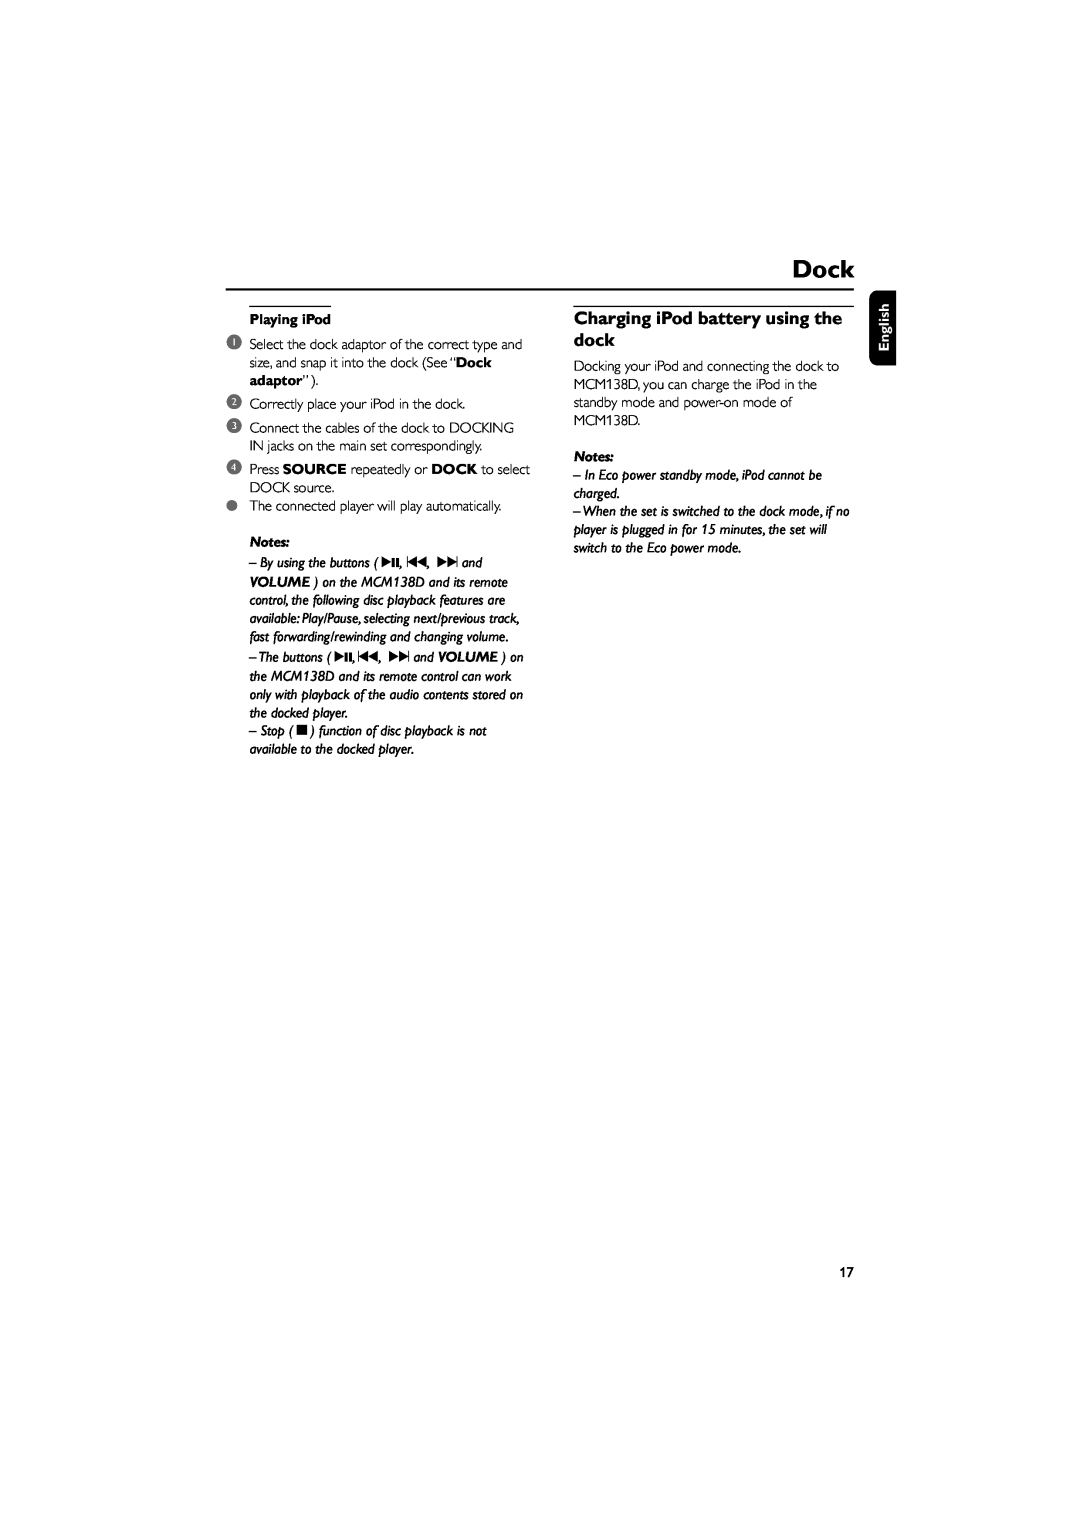 Philips MCM138D user manual Charging iPod battery using the dock, Playing iPod, Dock, English 